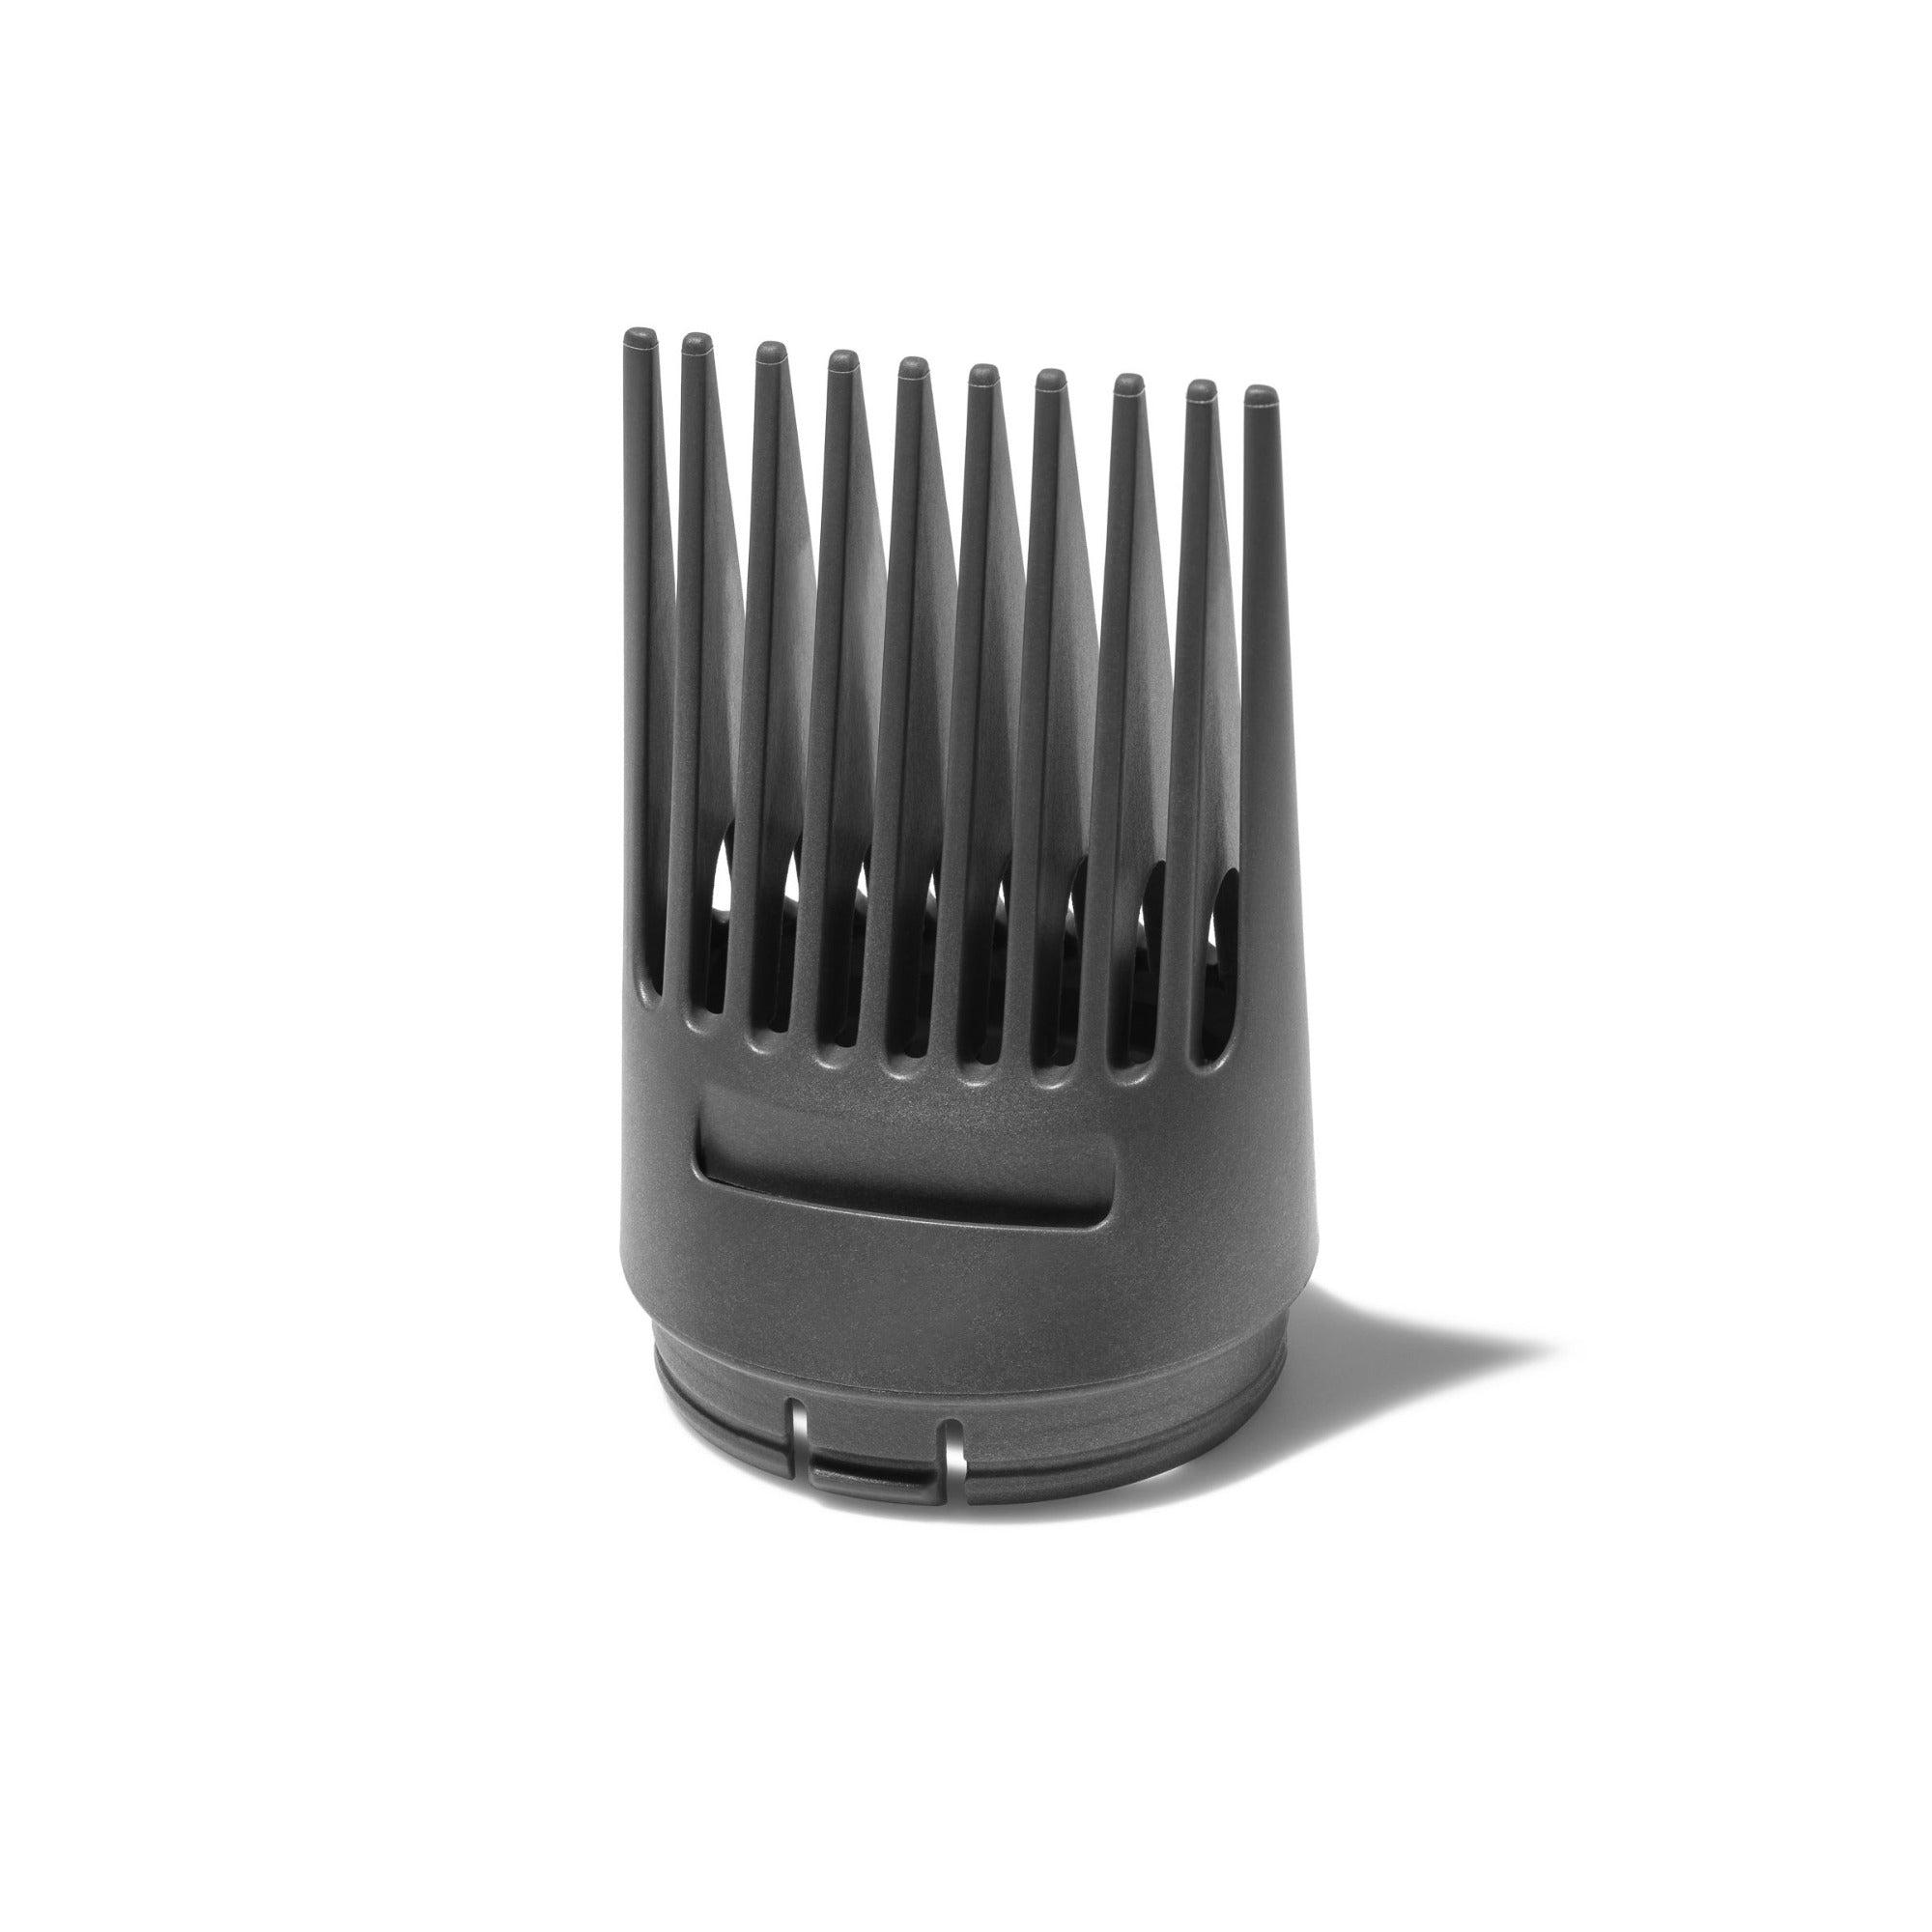 T3 Smoothing Comb compatible with select hair dryers